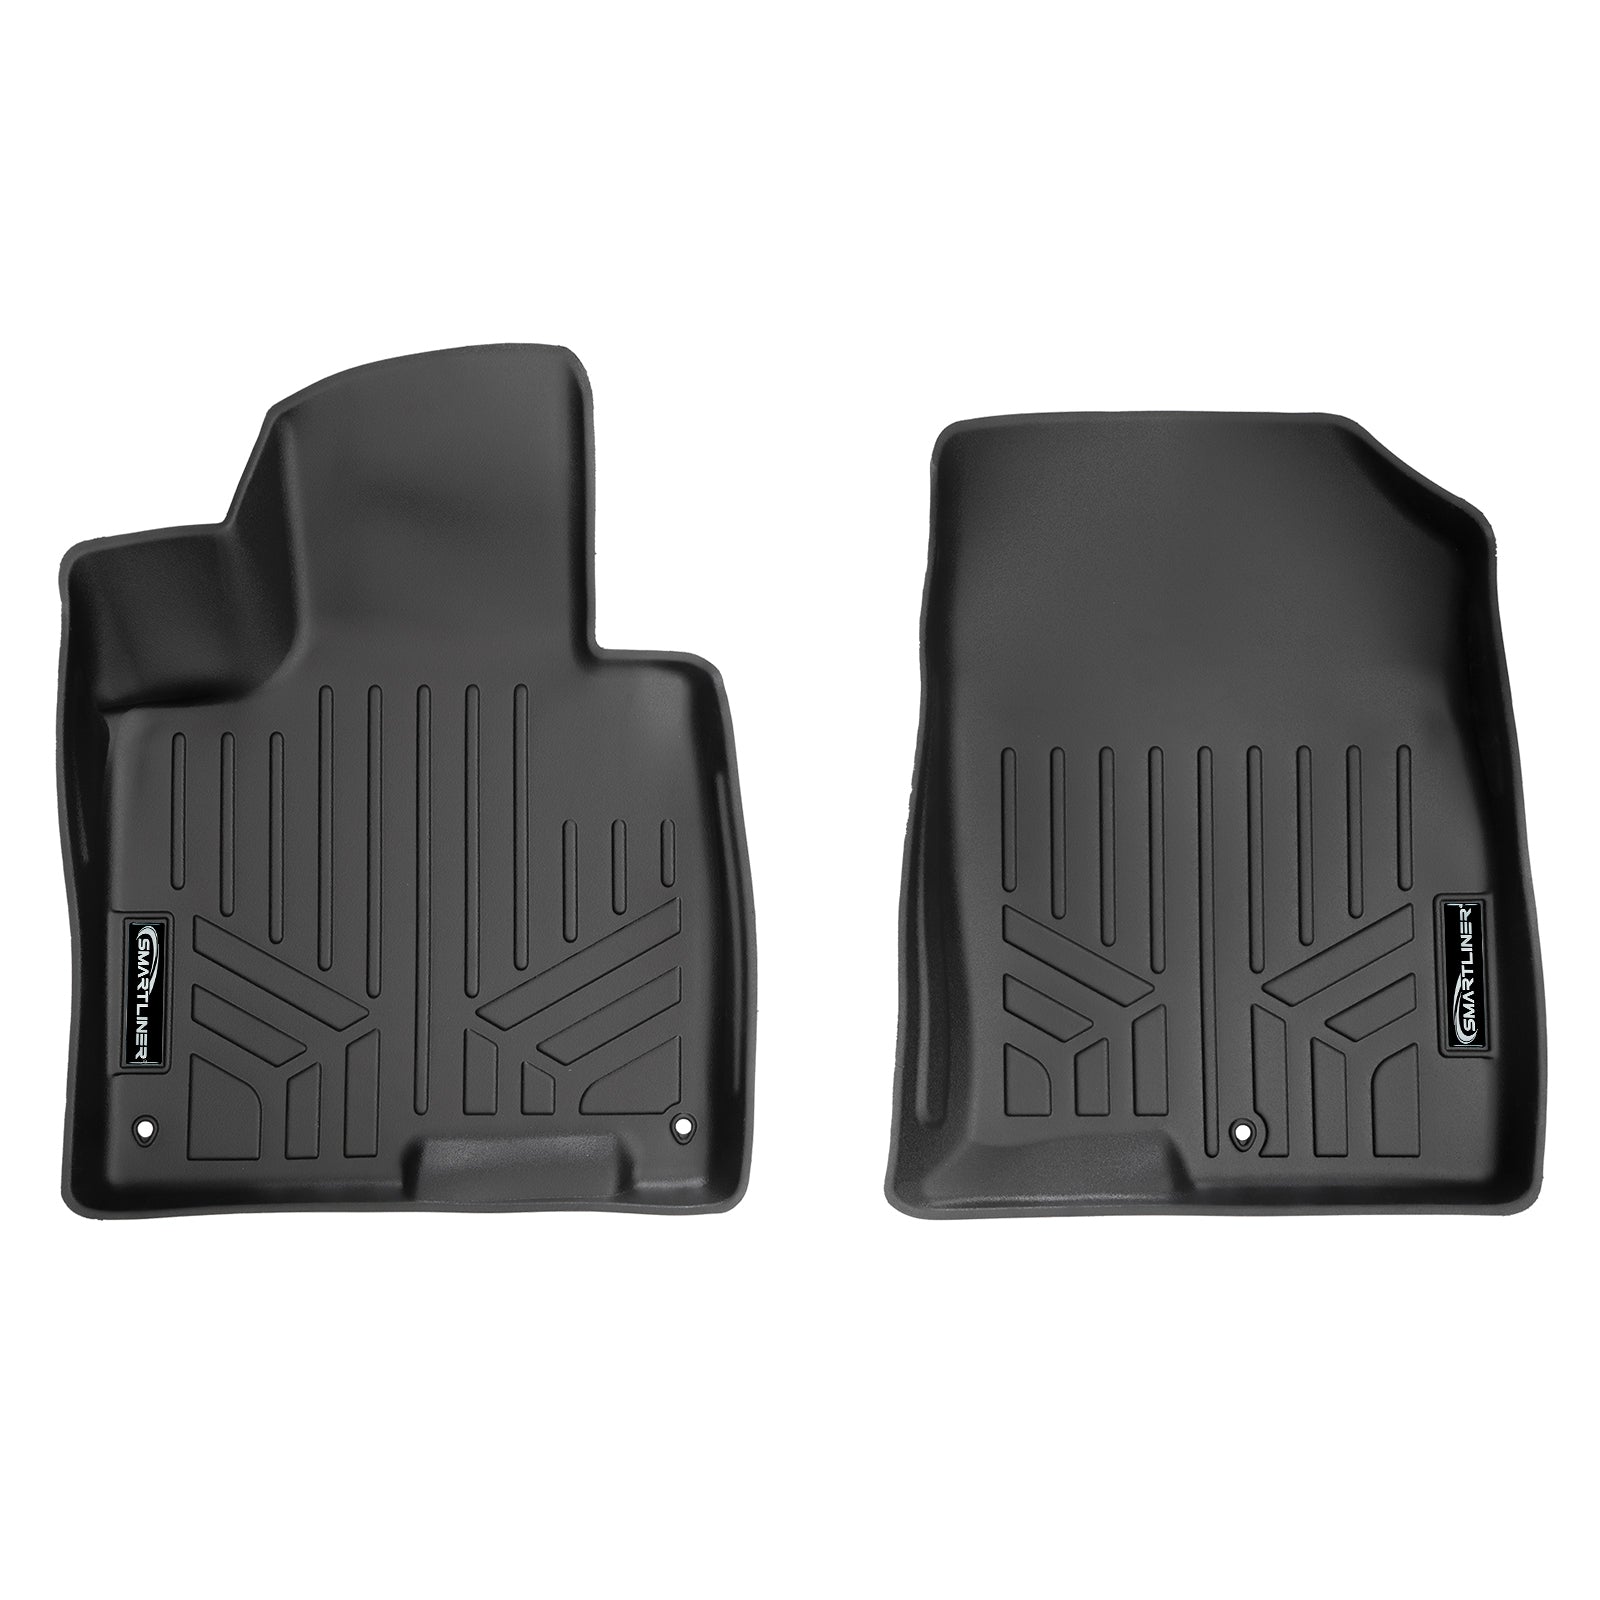 SMARTLINER Custom Fit Floor Liners For 2023-2024 Kia Sportage Hybrid Models without Subwoofer in Cargo Area